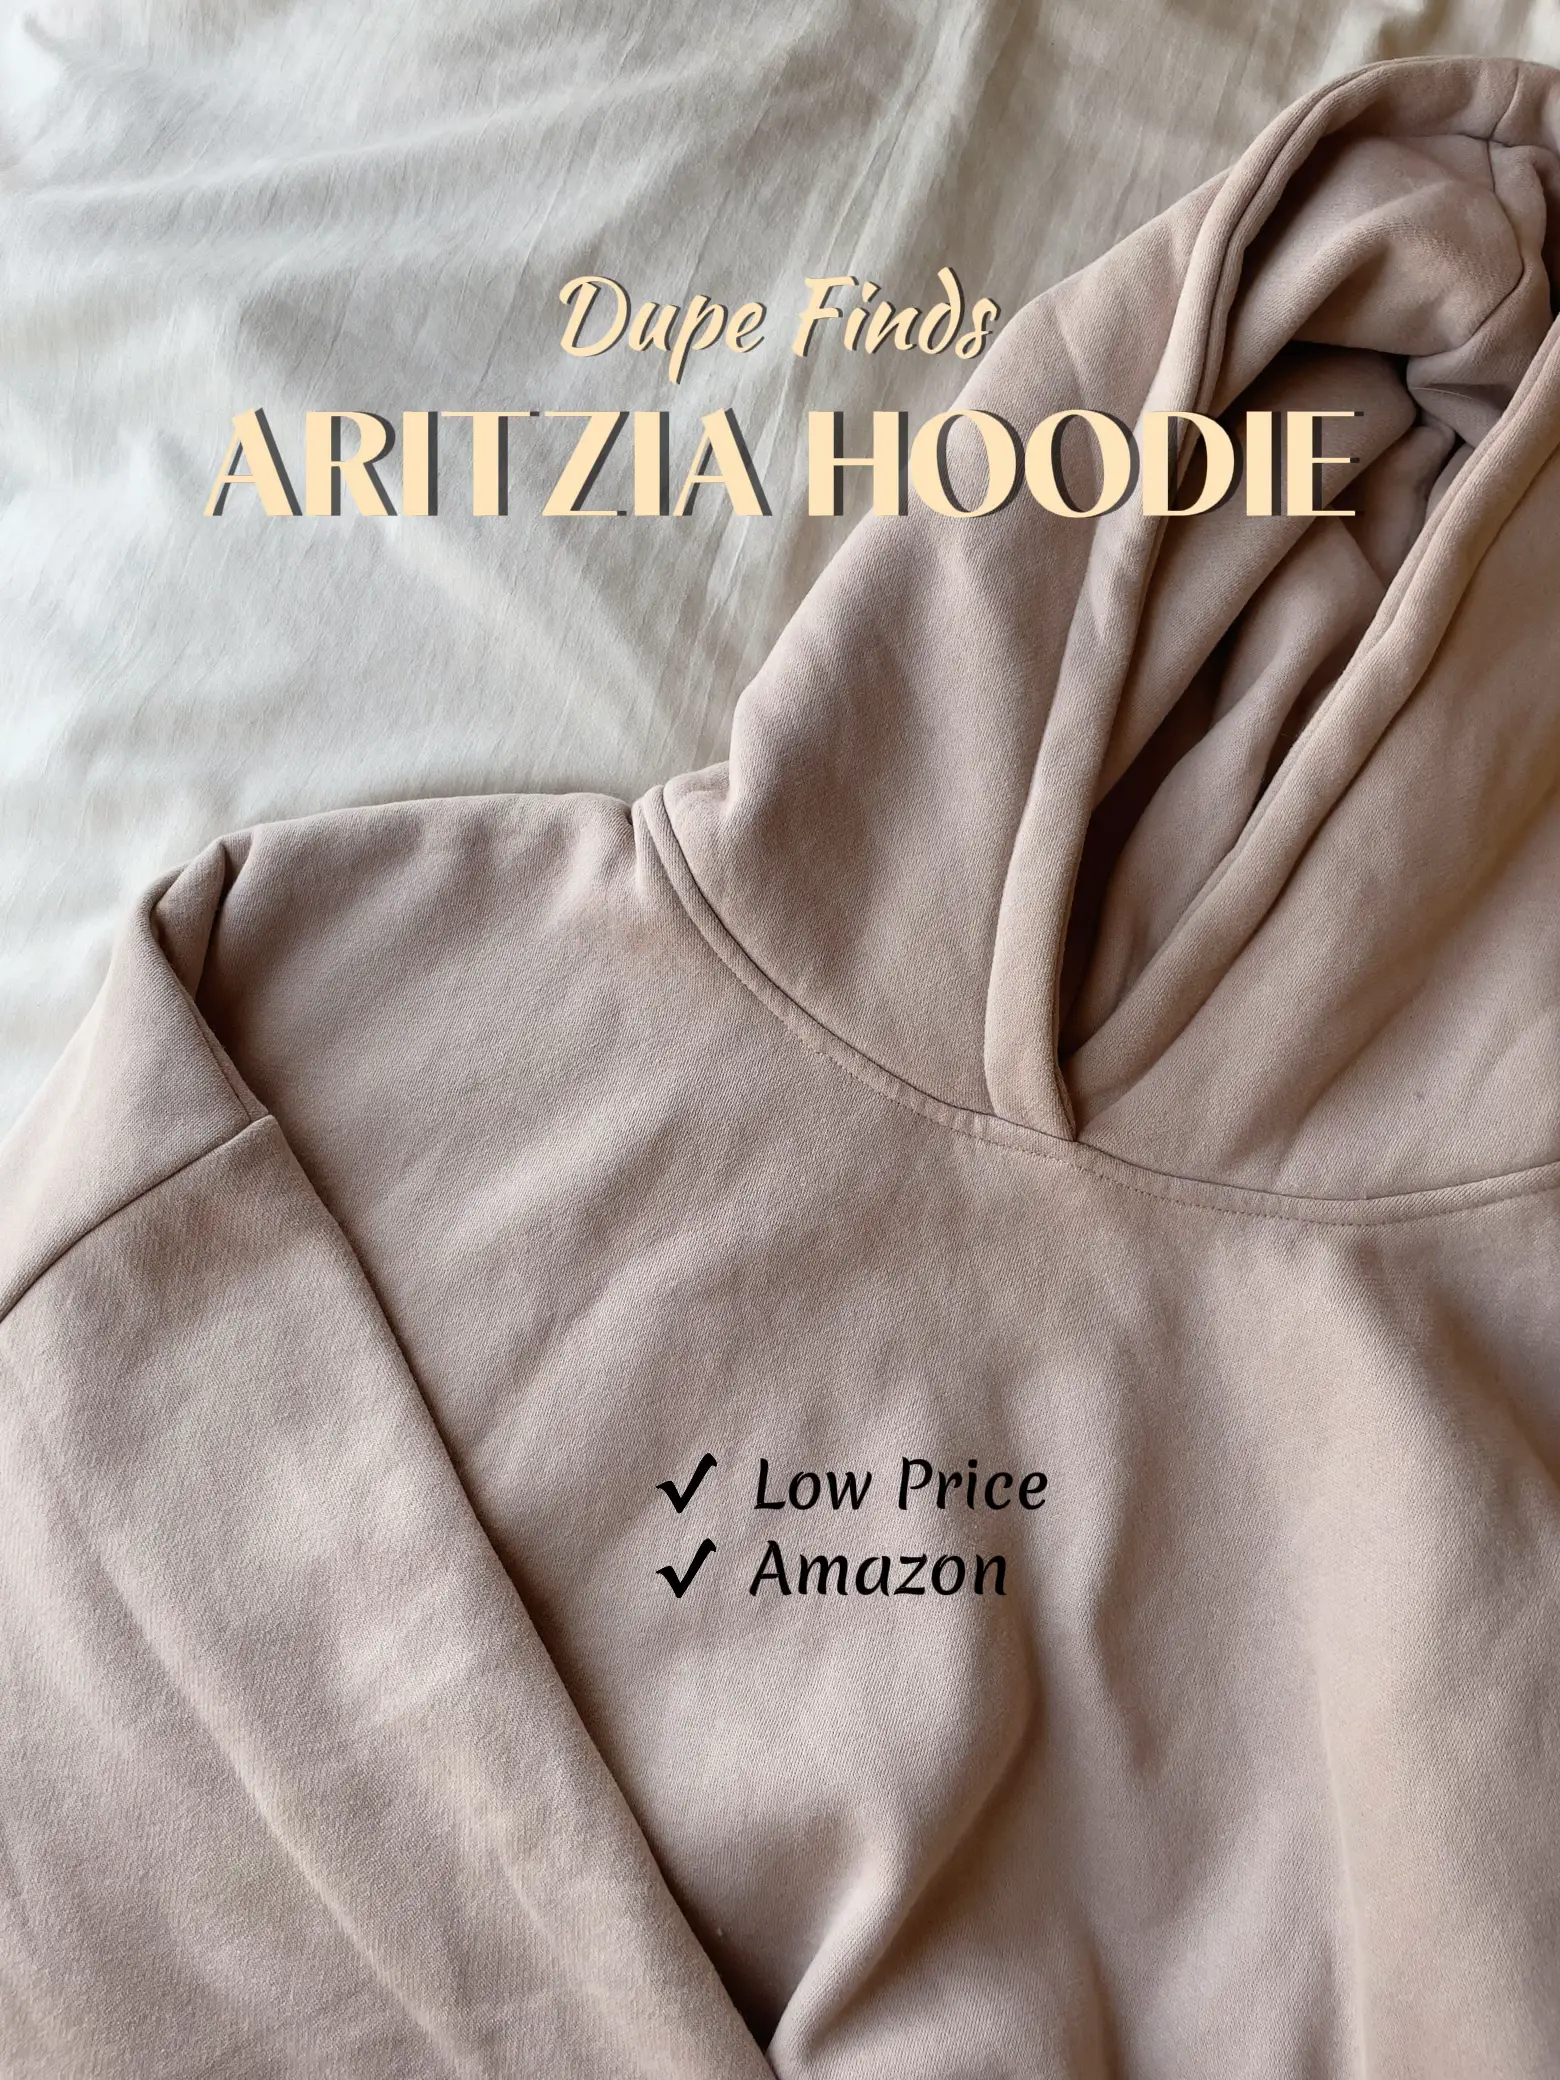 These Popular Aritzia Dupes Look Nearly Identical & No One Would Ever Know  The Difference - Narcity